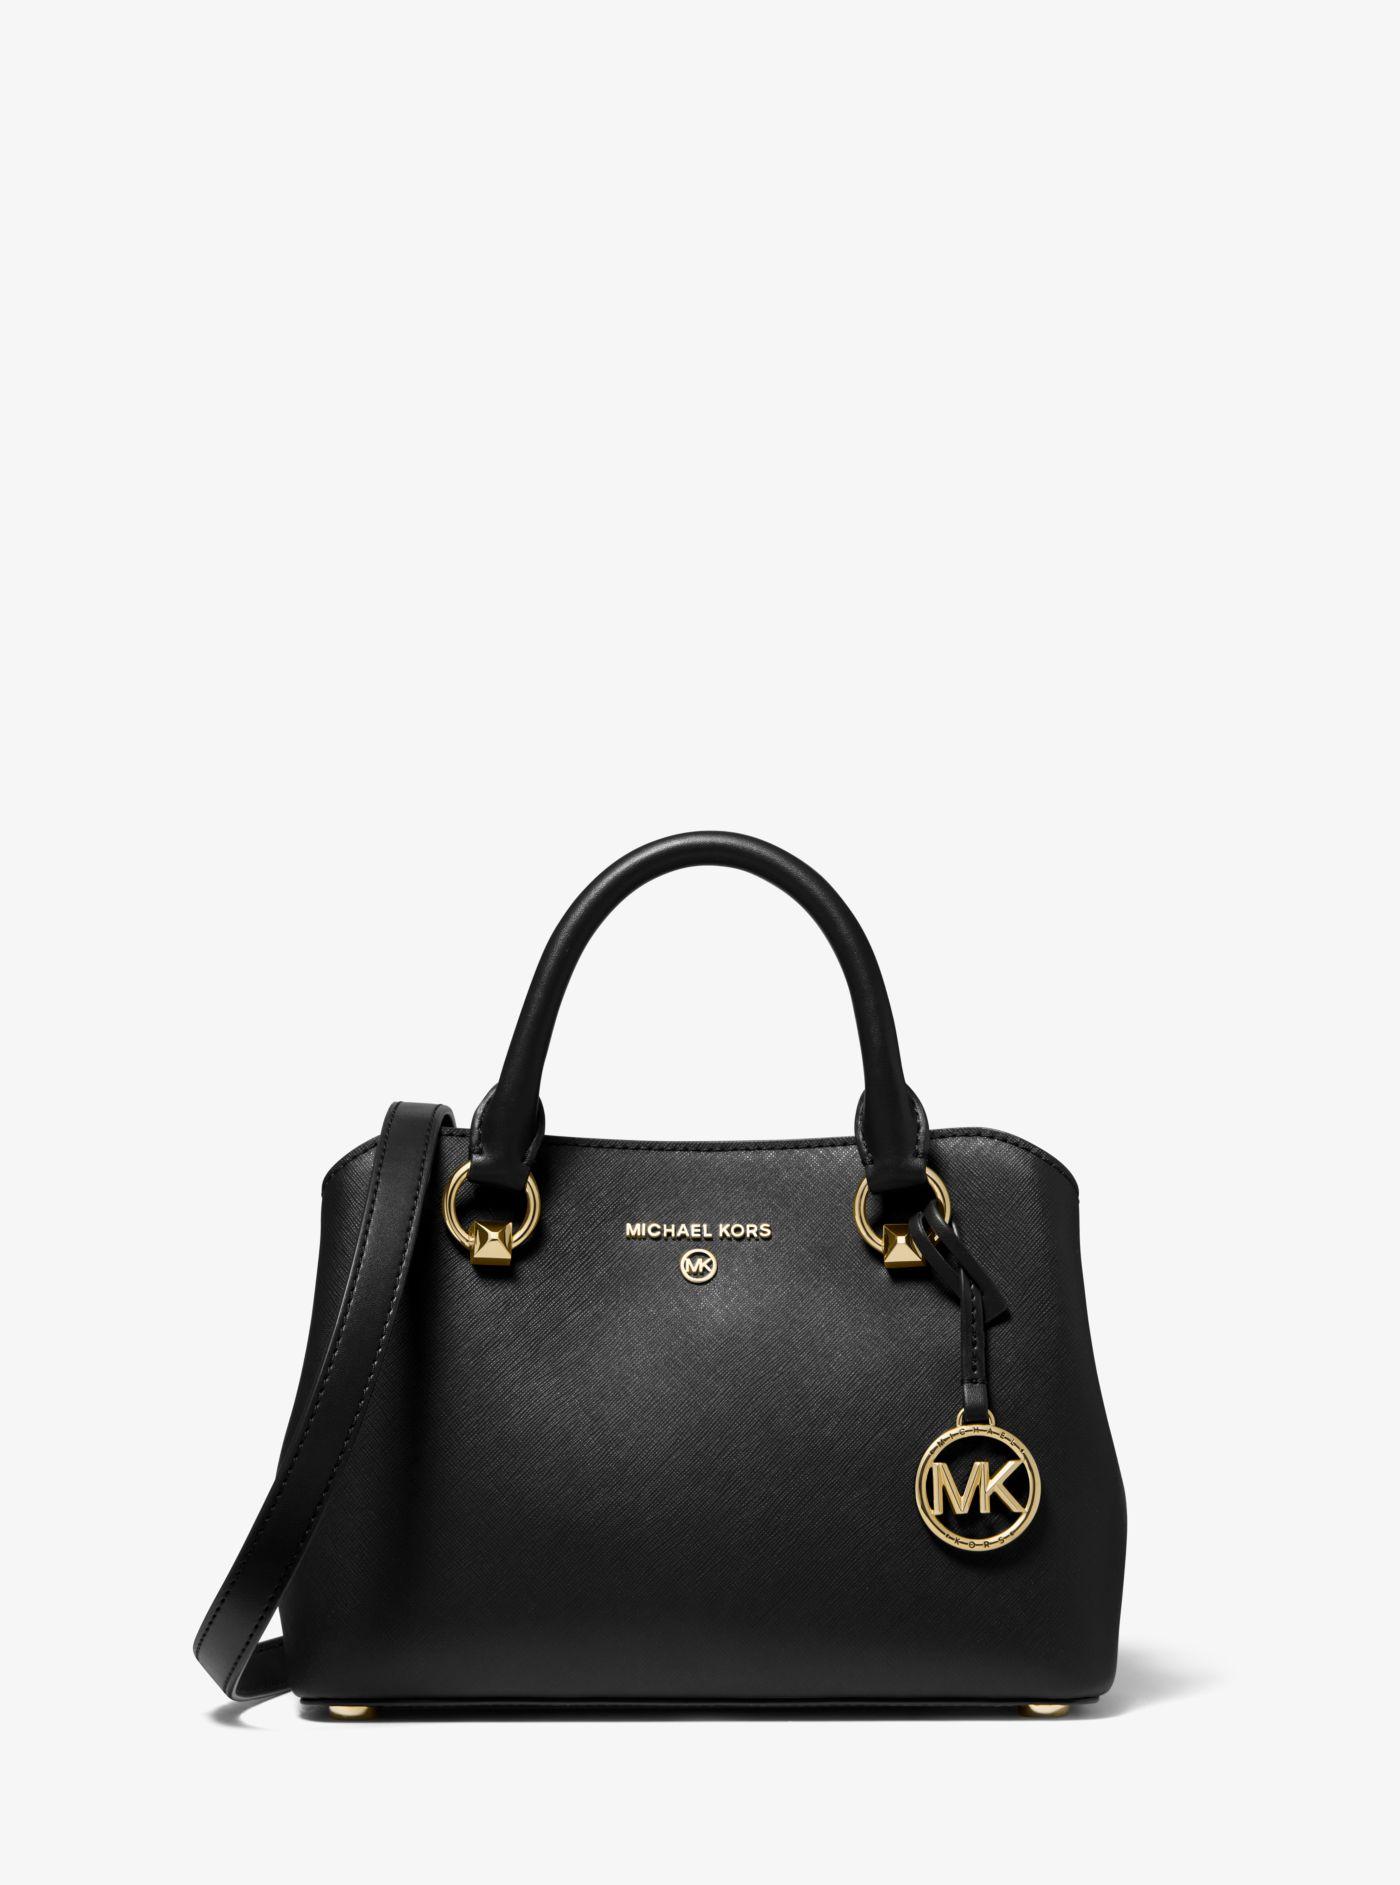 Michael Kors Edith Small Saffiano Leather Satchel in Black | Lyst